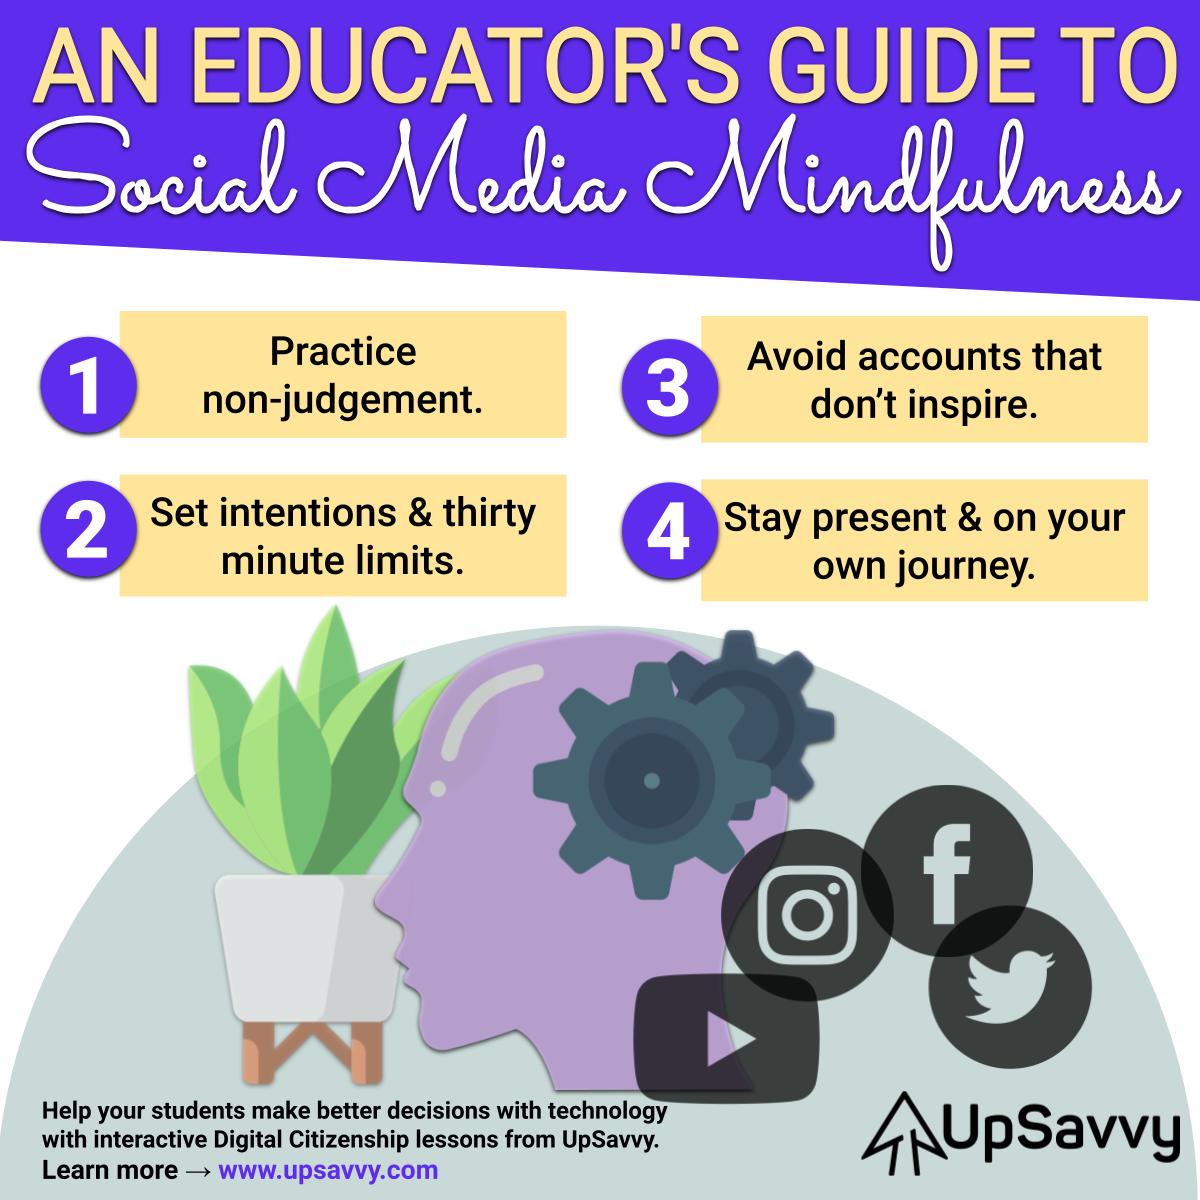 An Educator’s Guide to Social Media Mindfulness